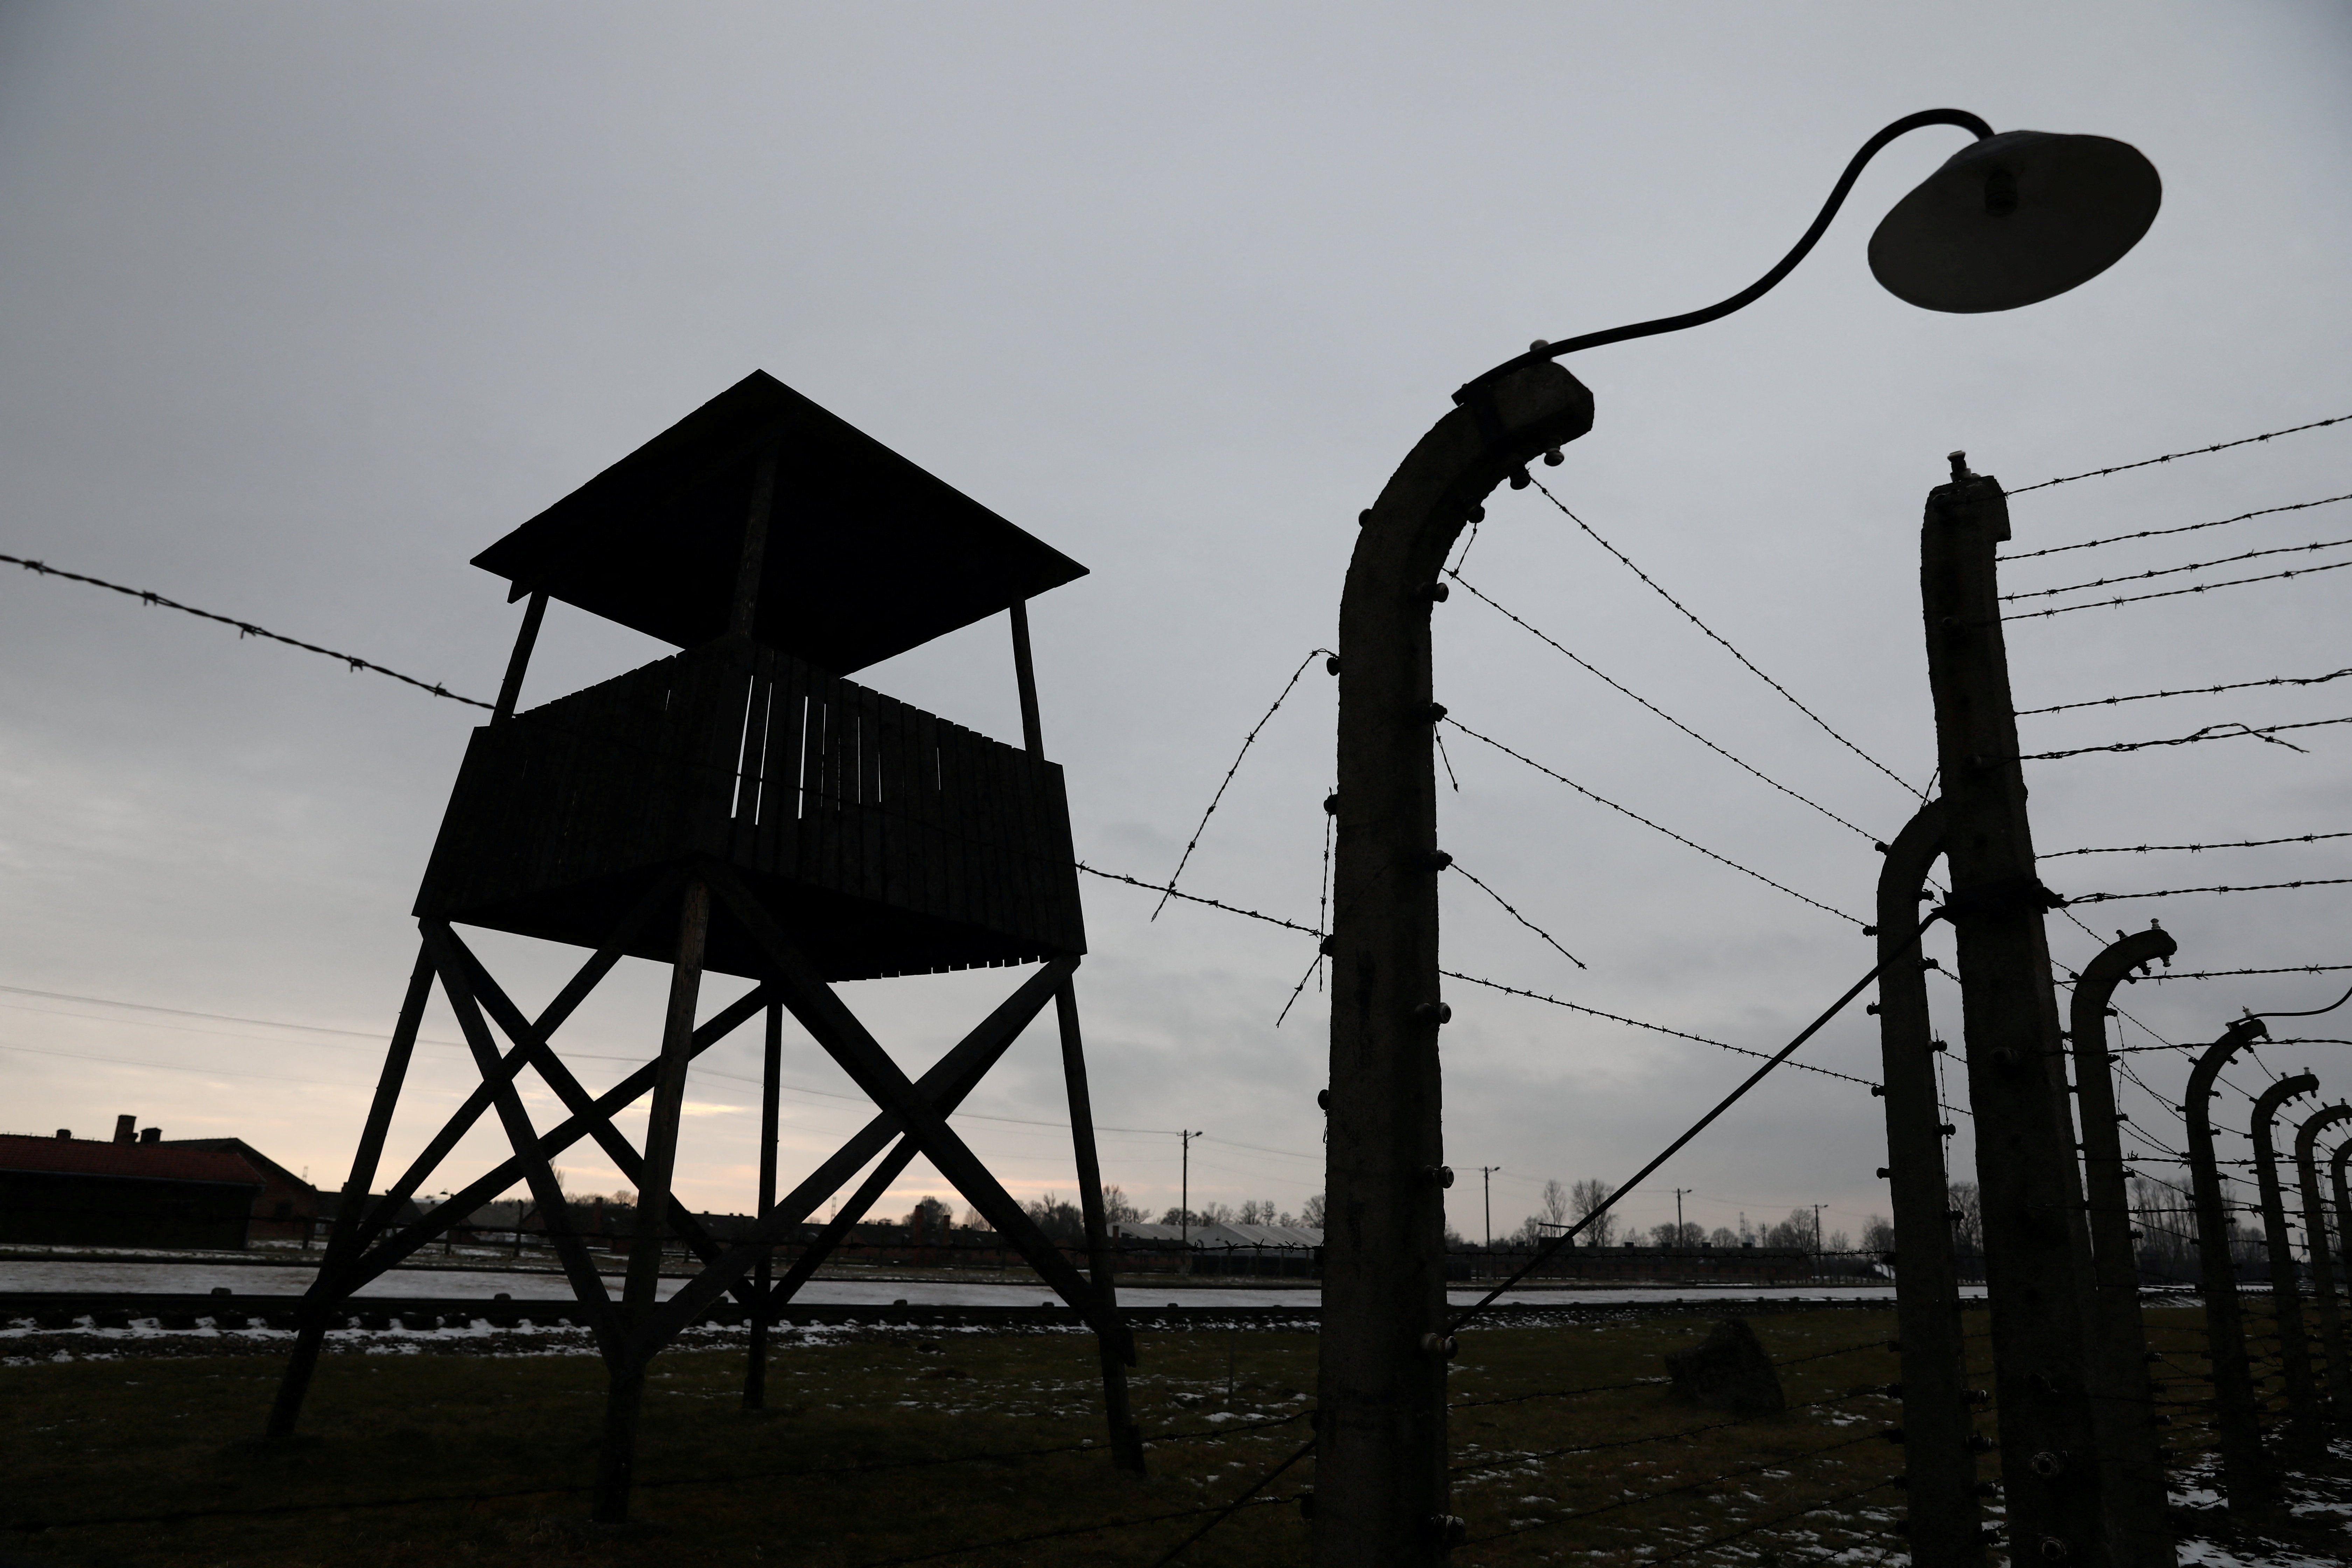 77th anniversary of the liberation of the concentration and extermination camp Auschwitz